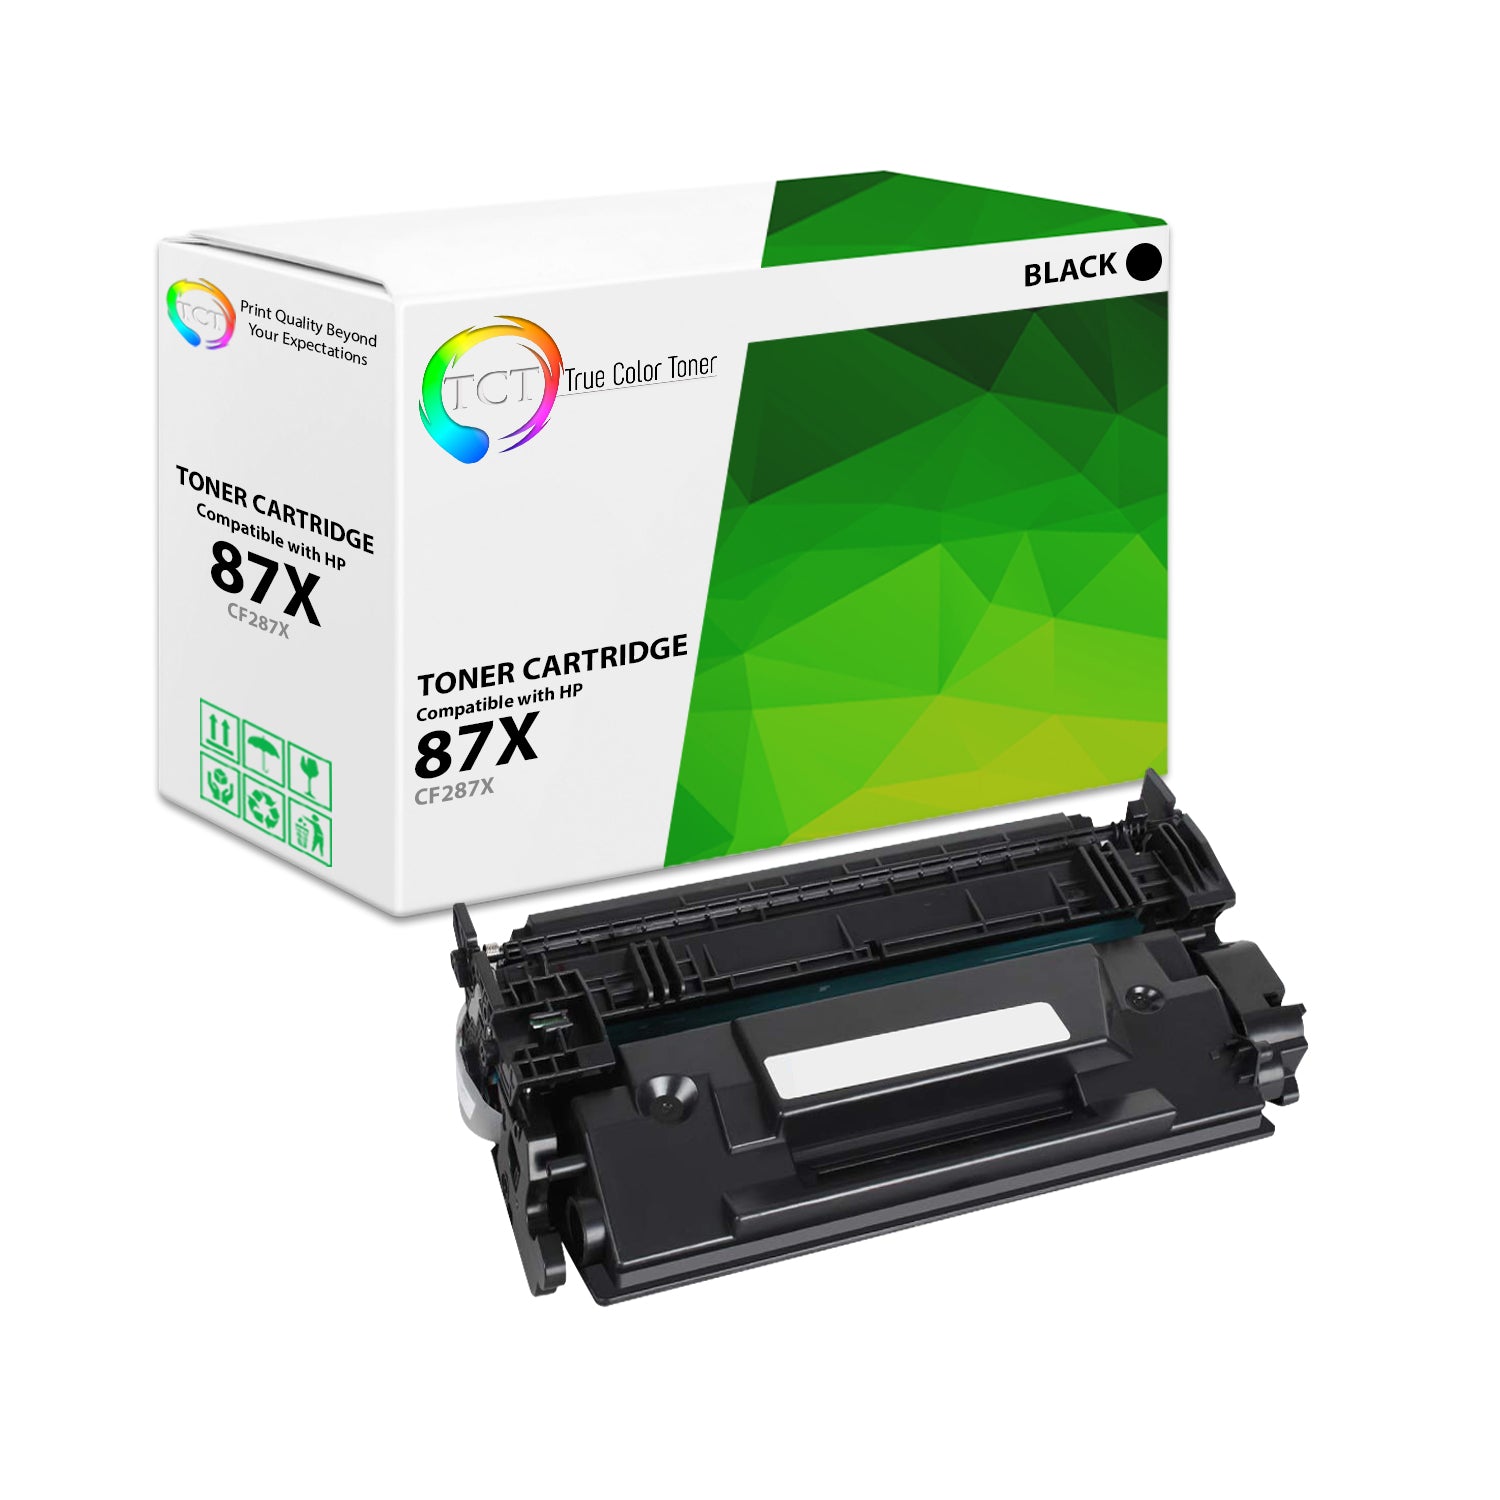 TCT Compatible High Yield Toner Cartridge Replacement for the HP 87X Series - 1 Pack Black